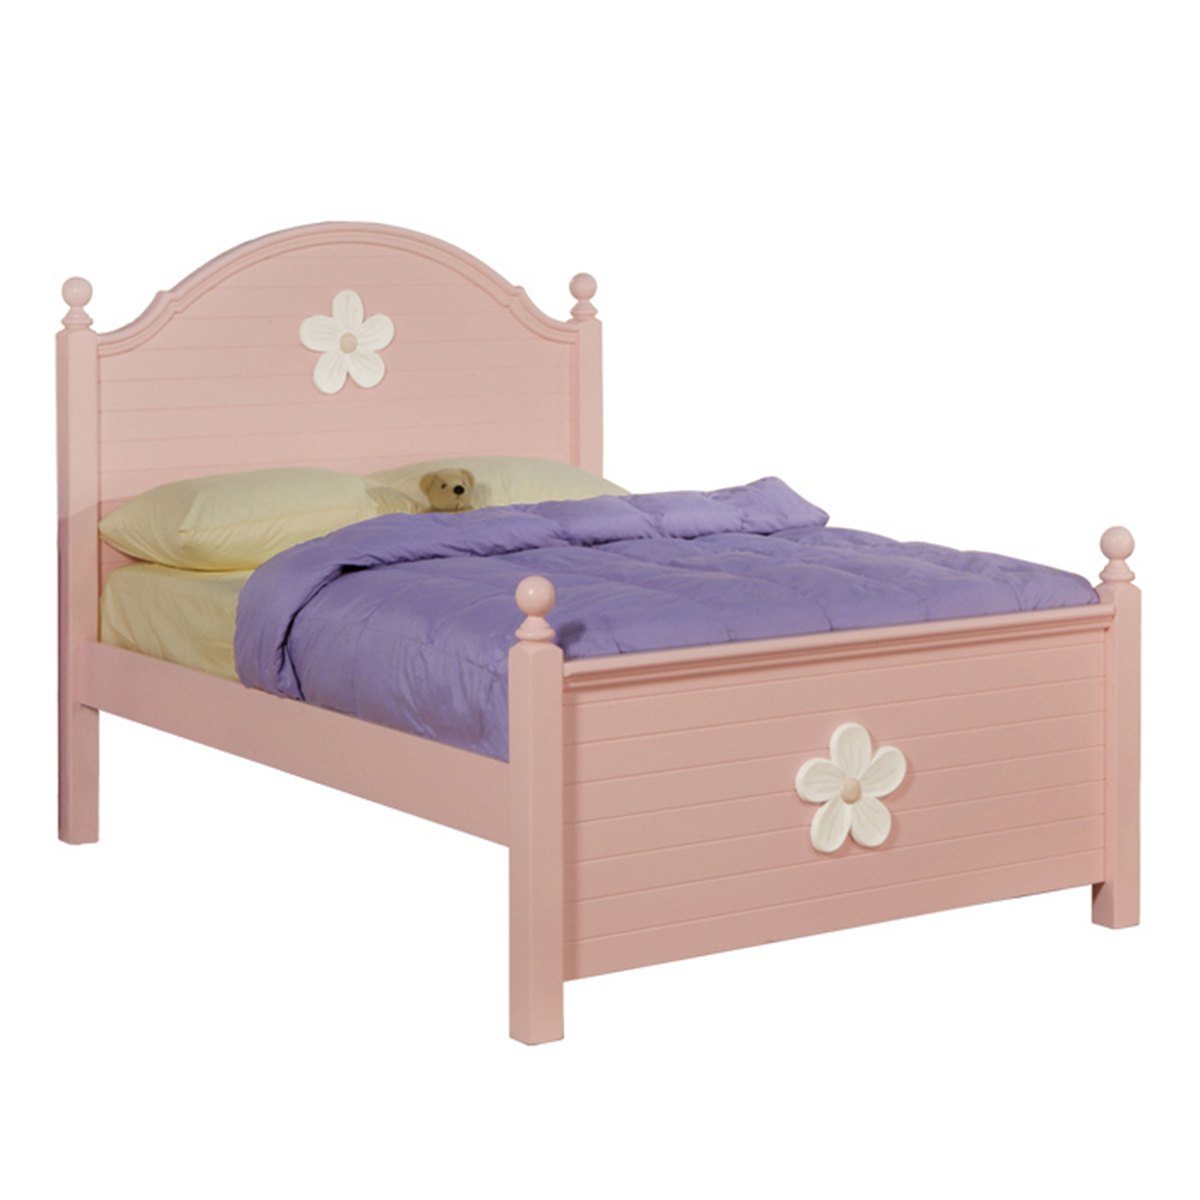 Acme Floresville Bed - Pink (White Flower)